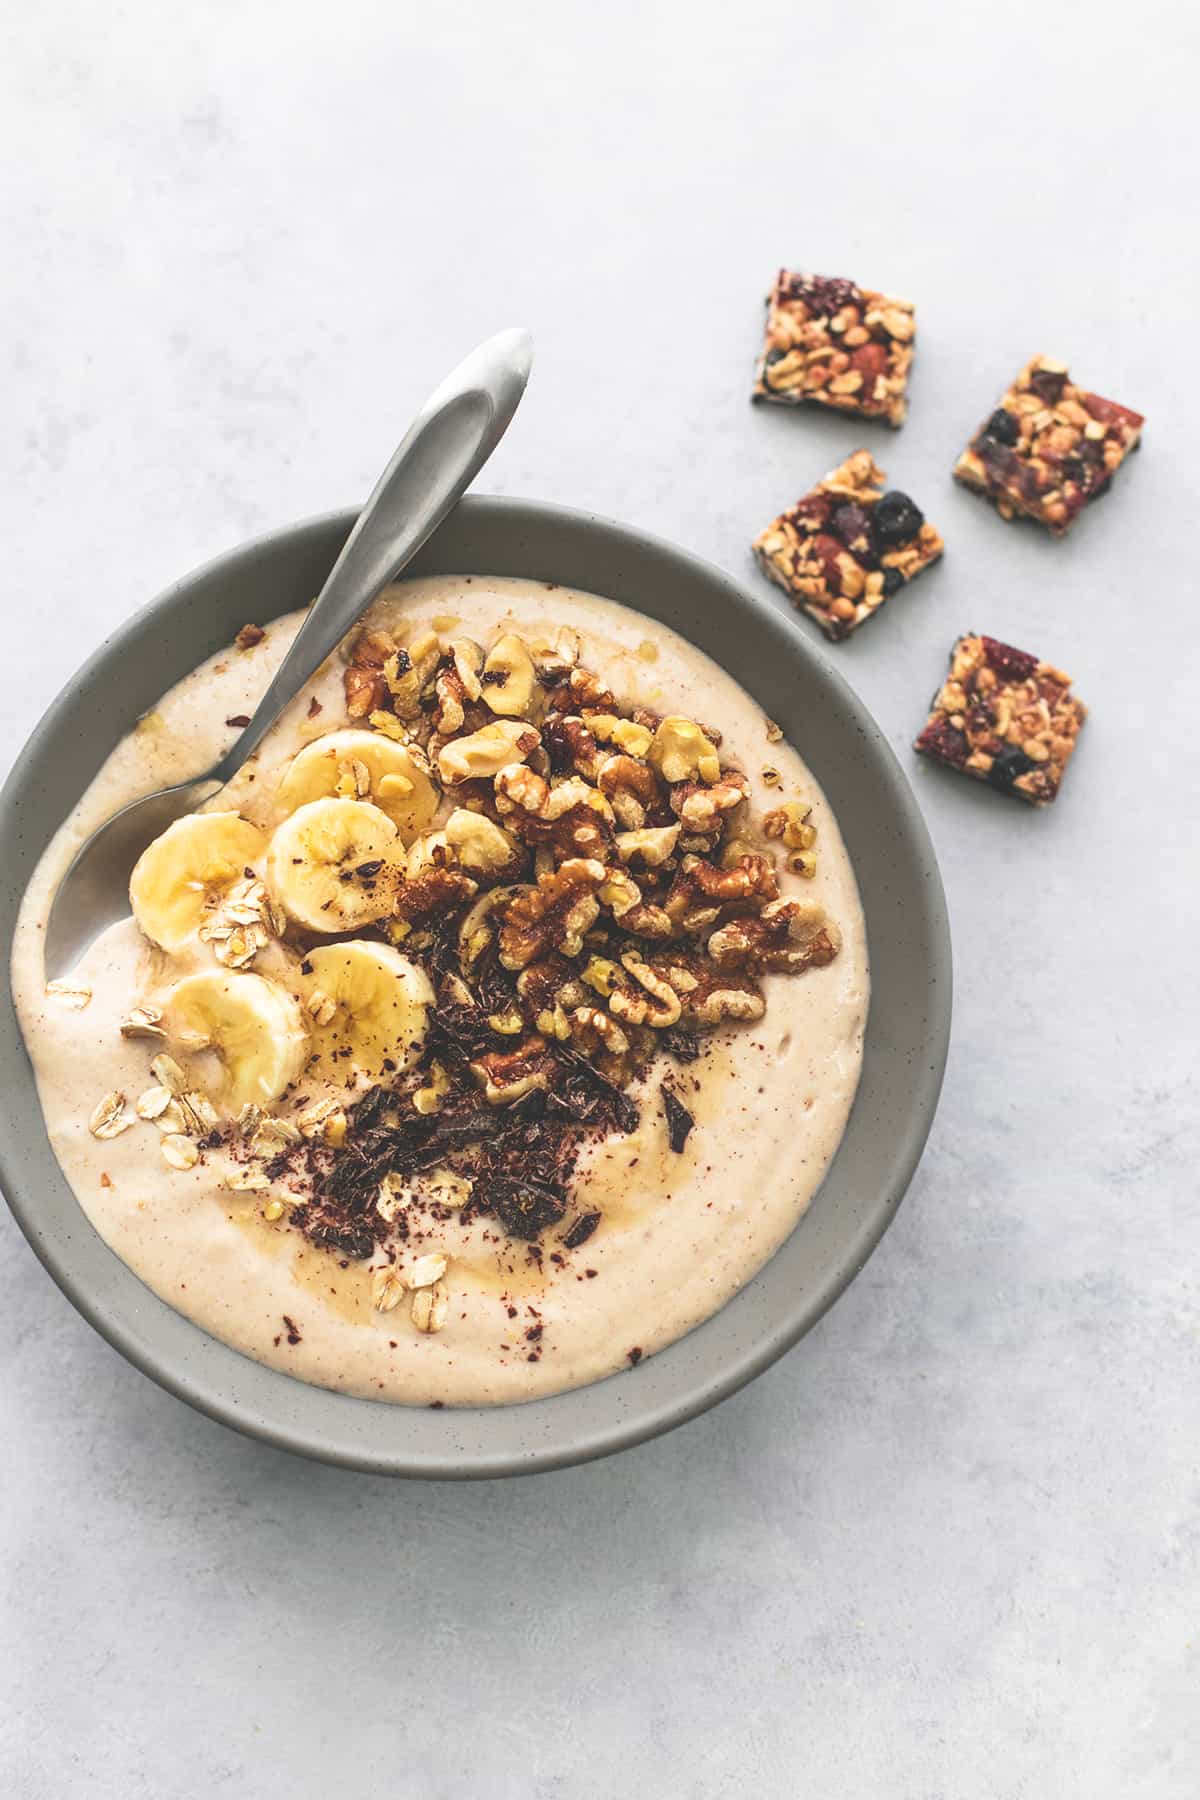 top view of a banana nut smoothie bowl with a spoon in it and granola bar chunks on the side.